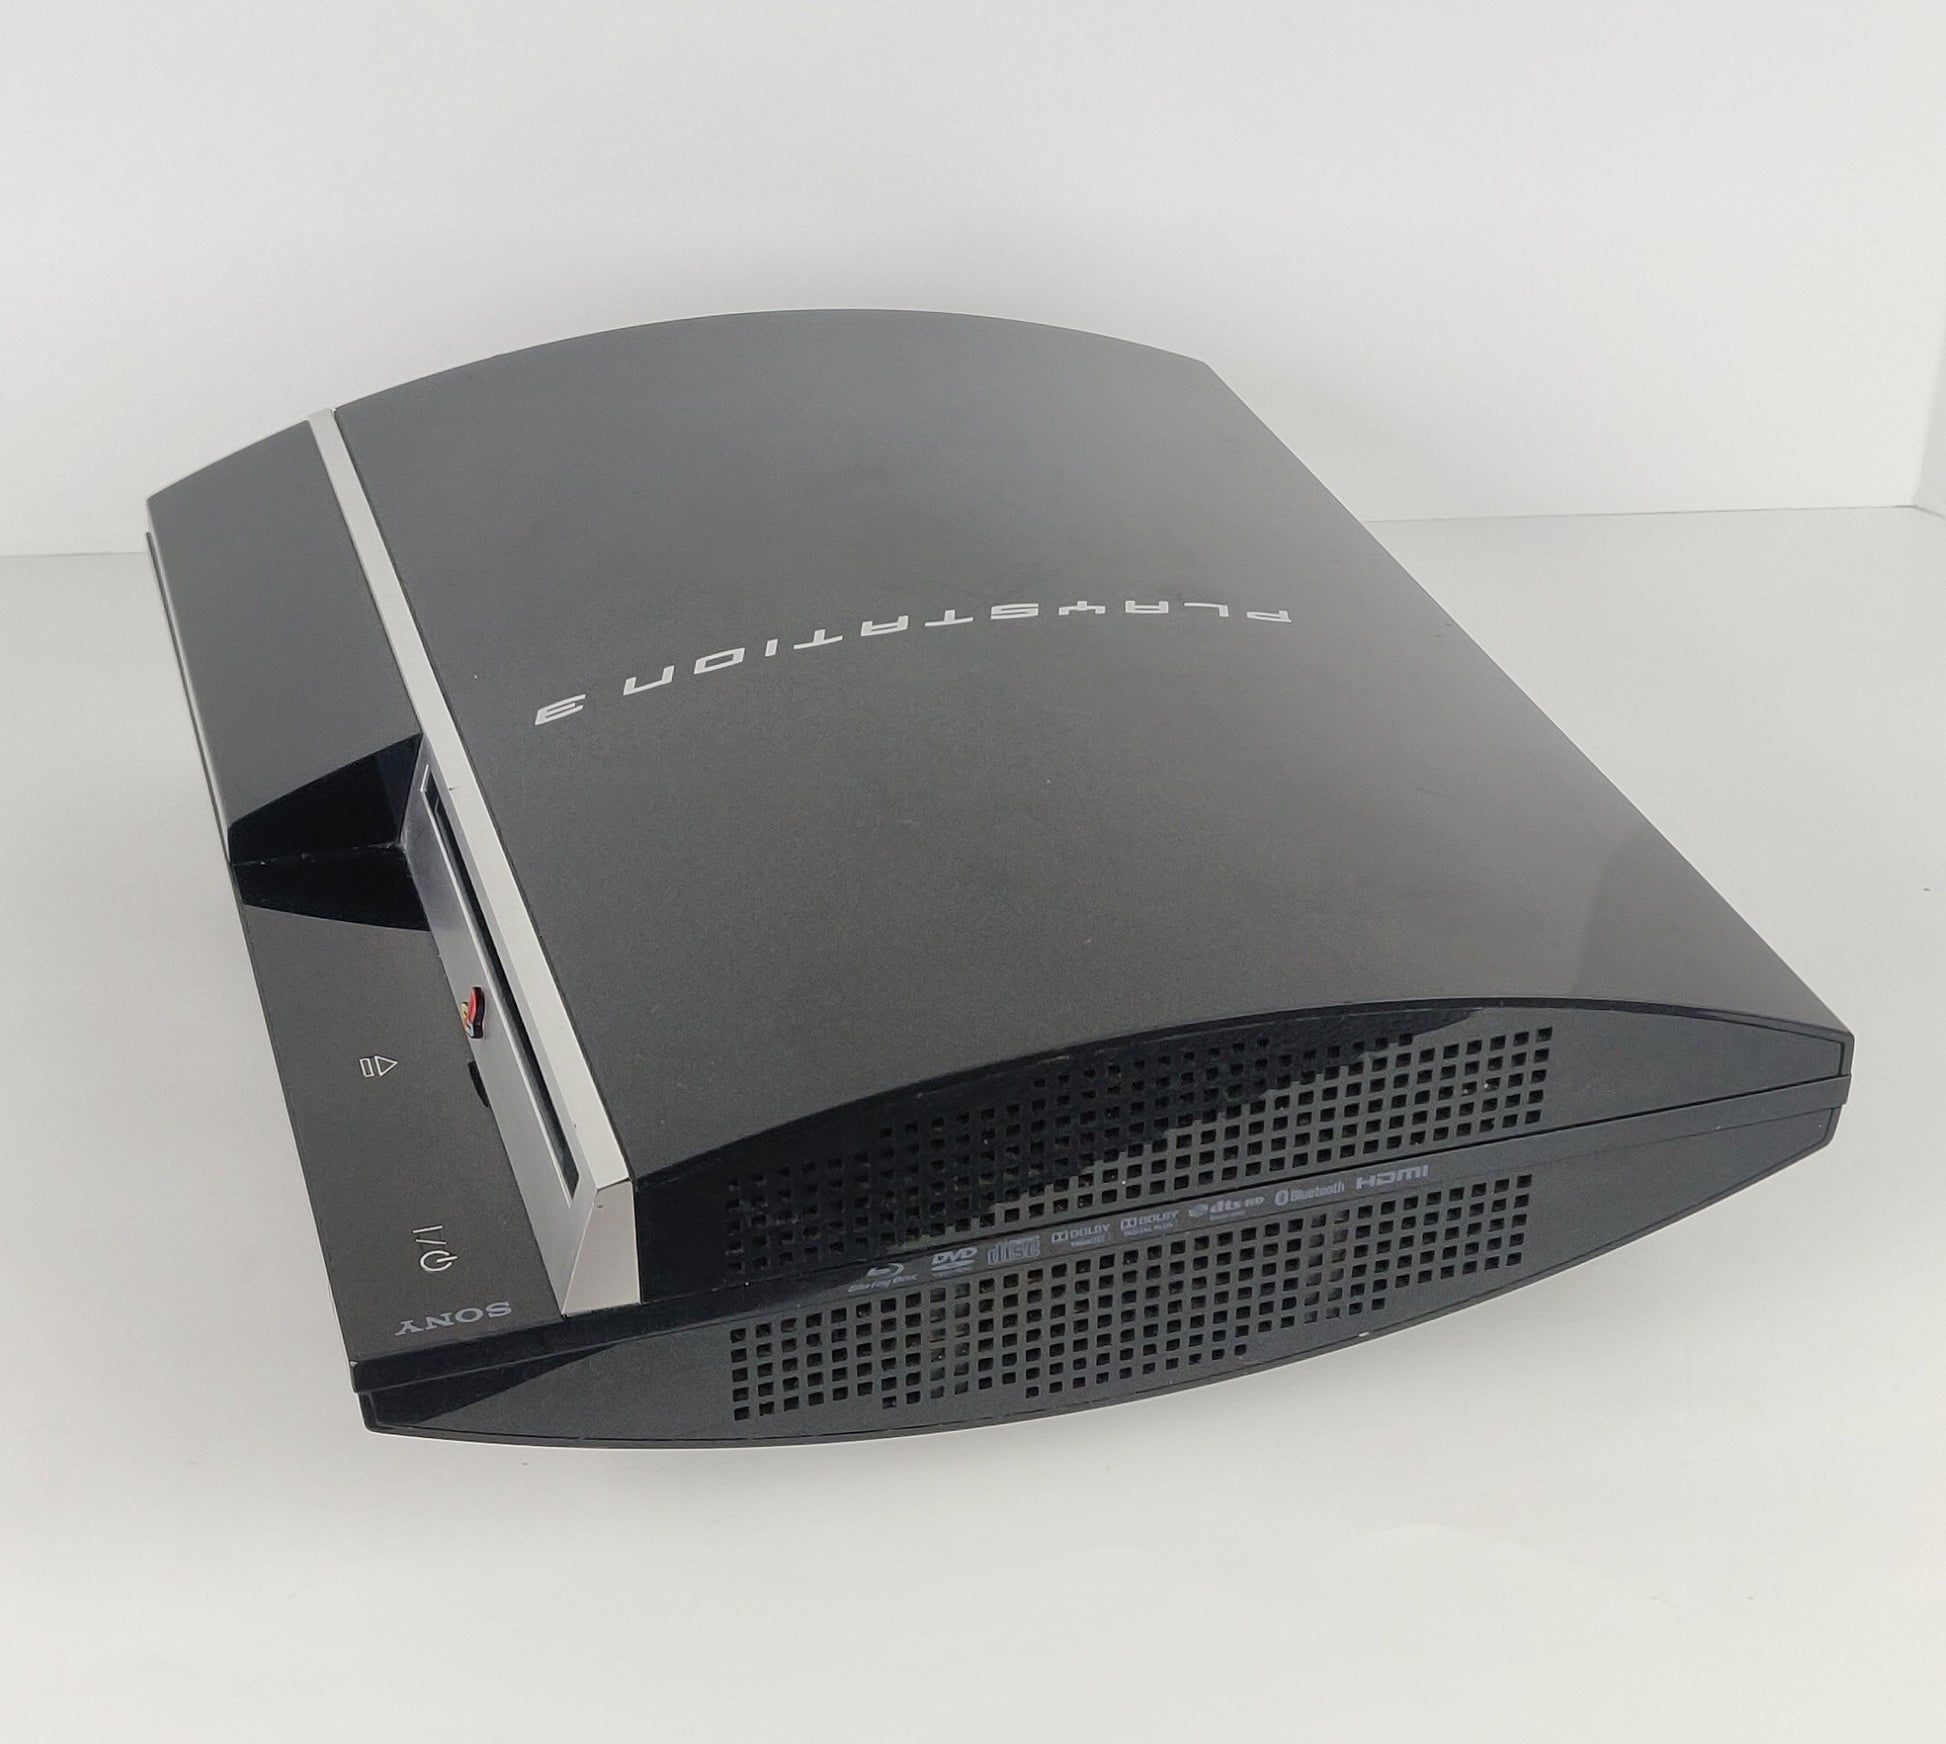 Black Plastic Sony Playstation 3 1TB Console at Rs 13000 in Jamnagar